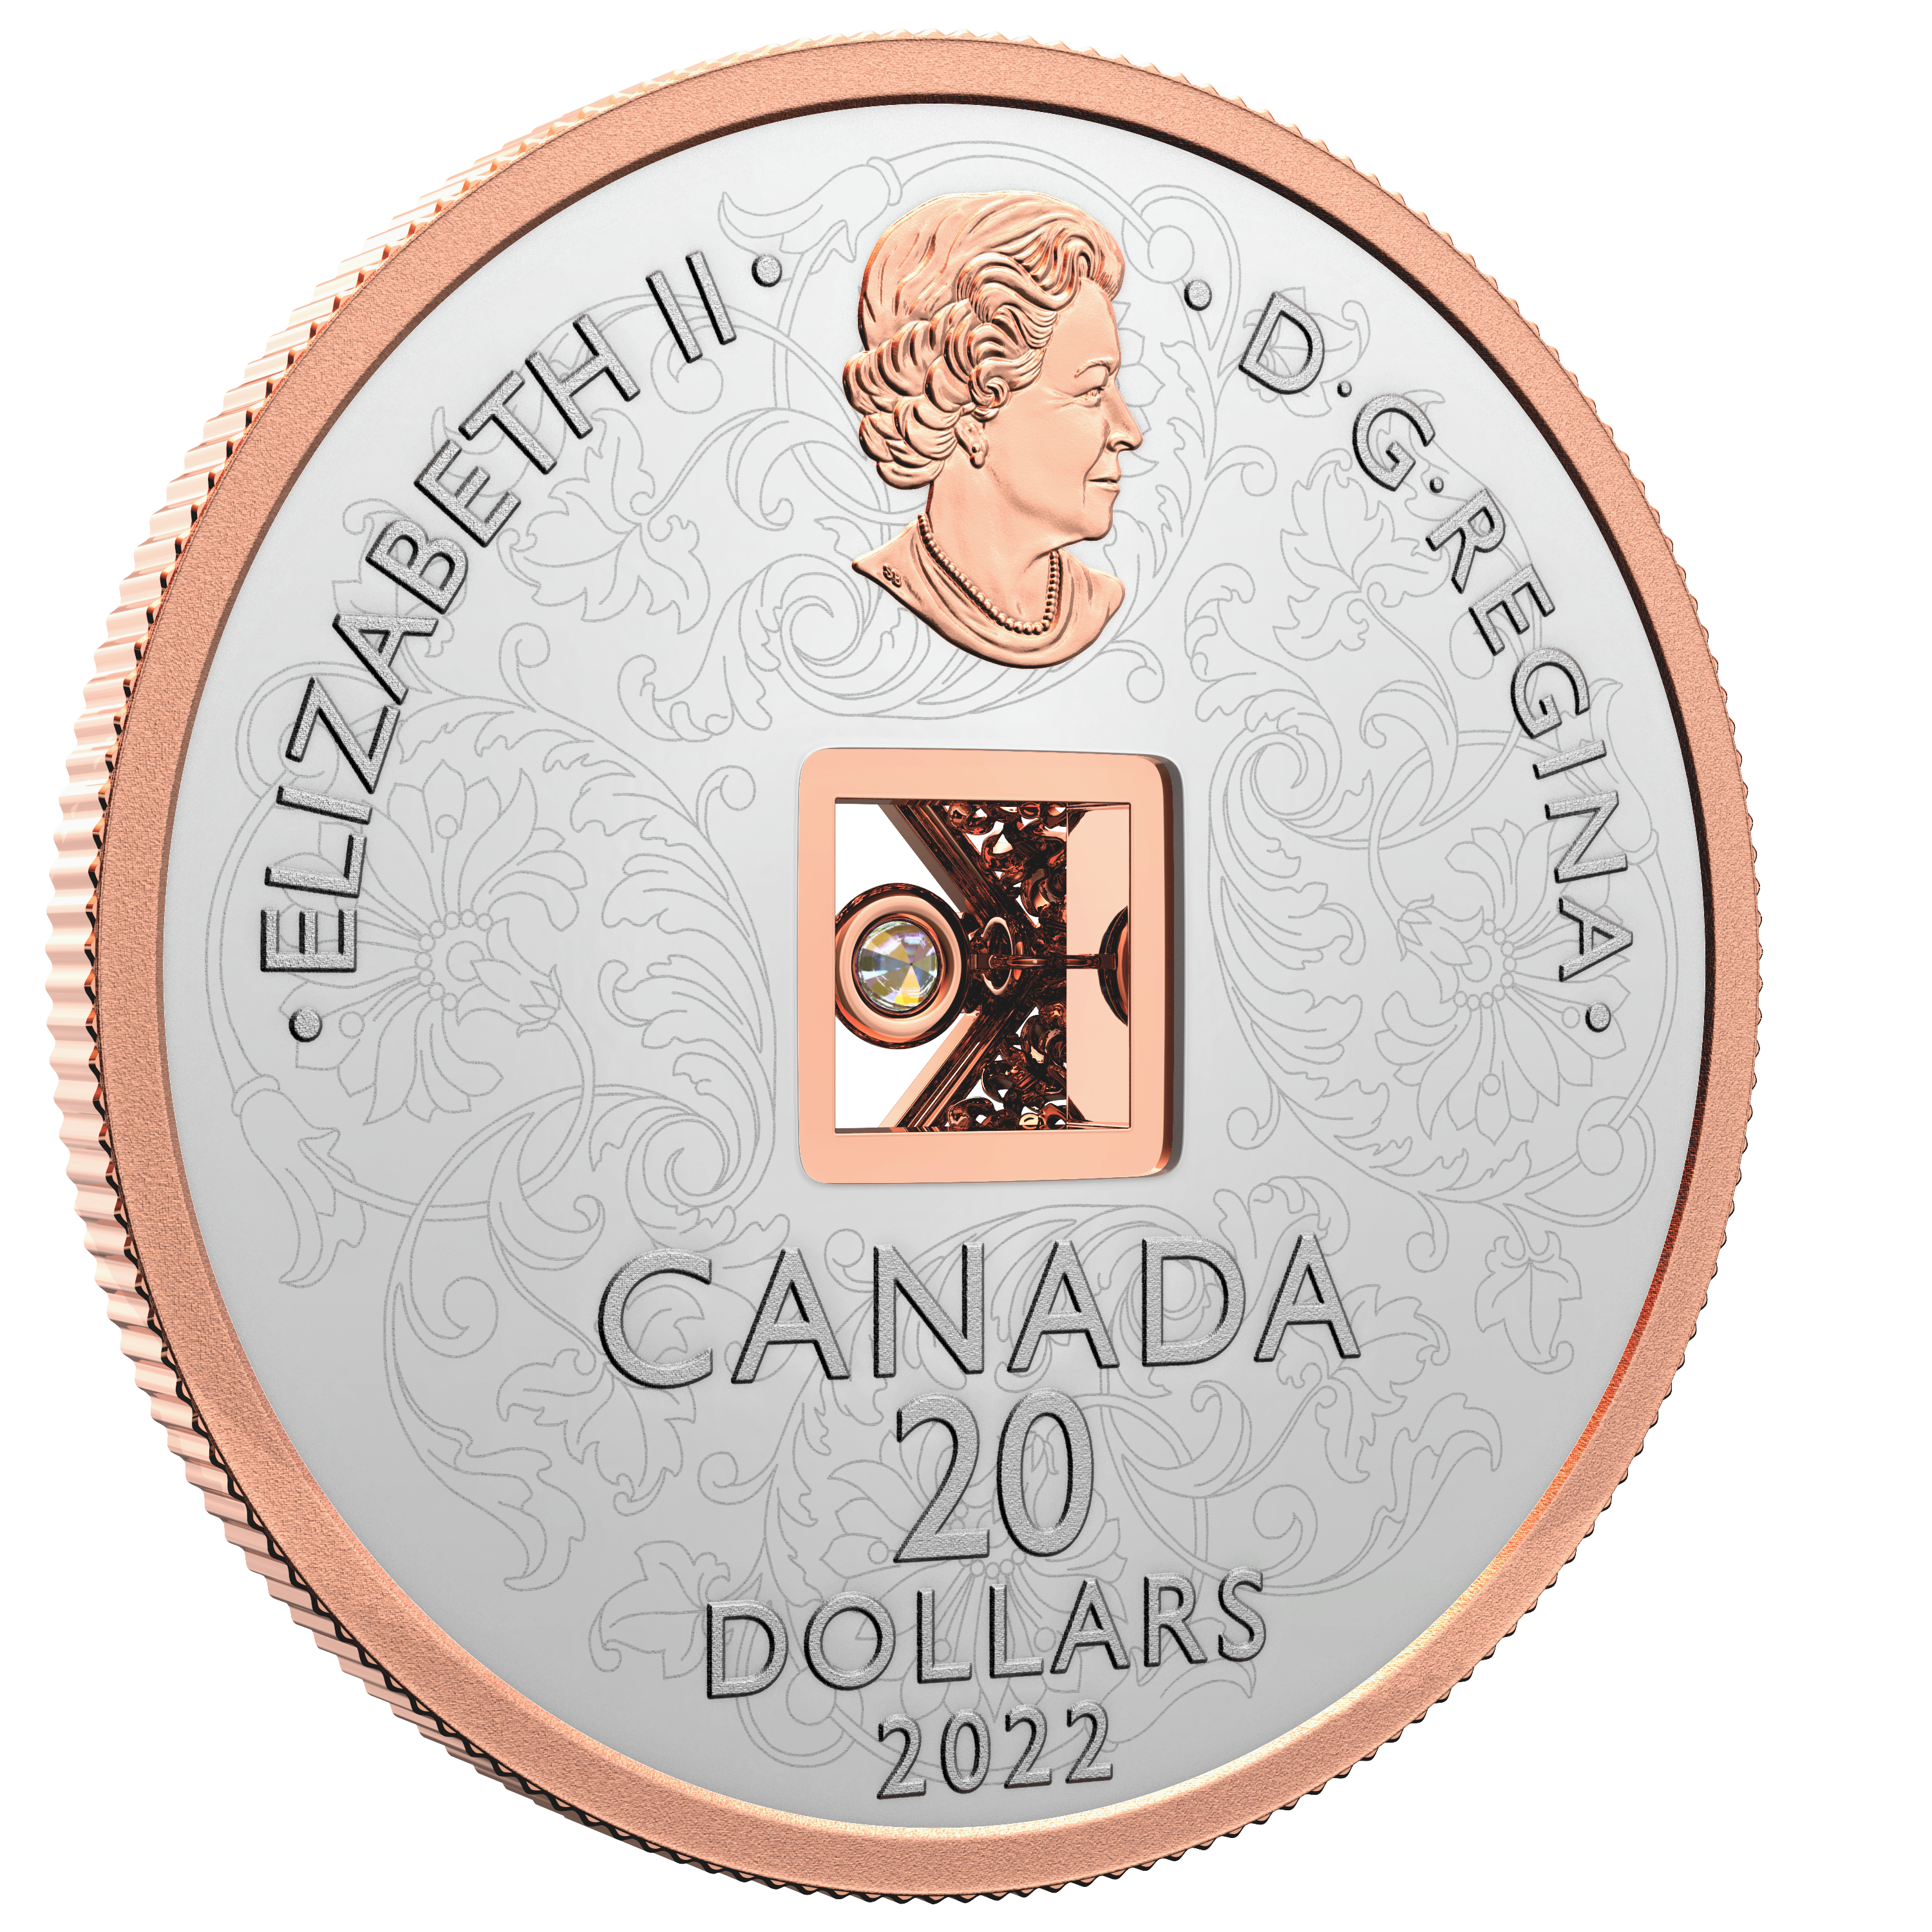 SPARKLE OF THE HEART Silver Coin $20 Canada 2022